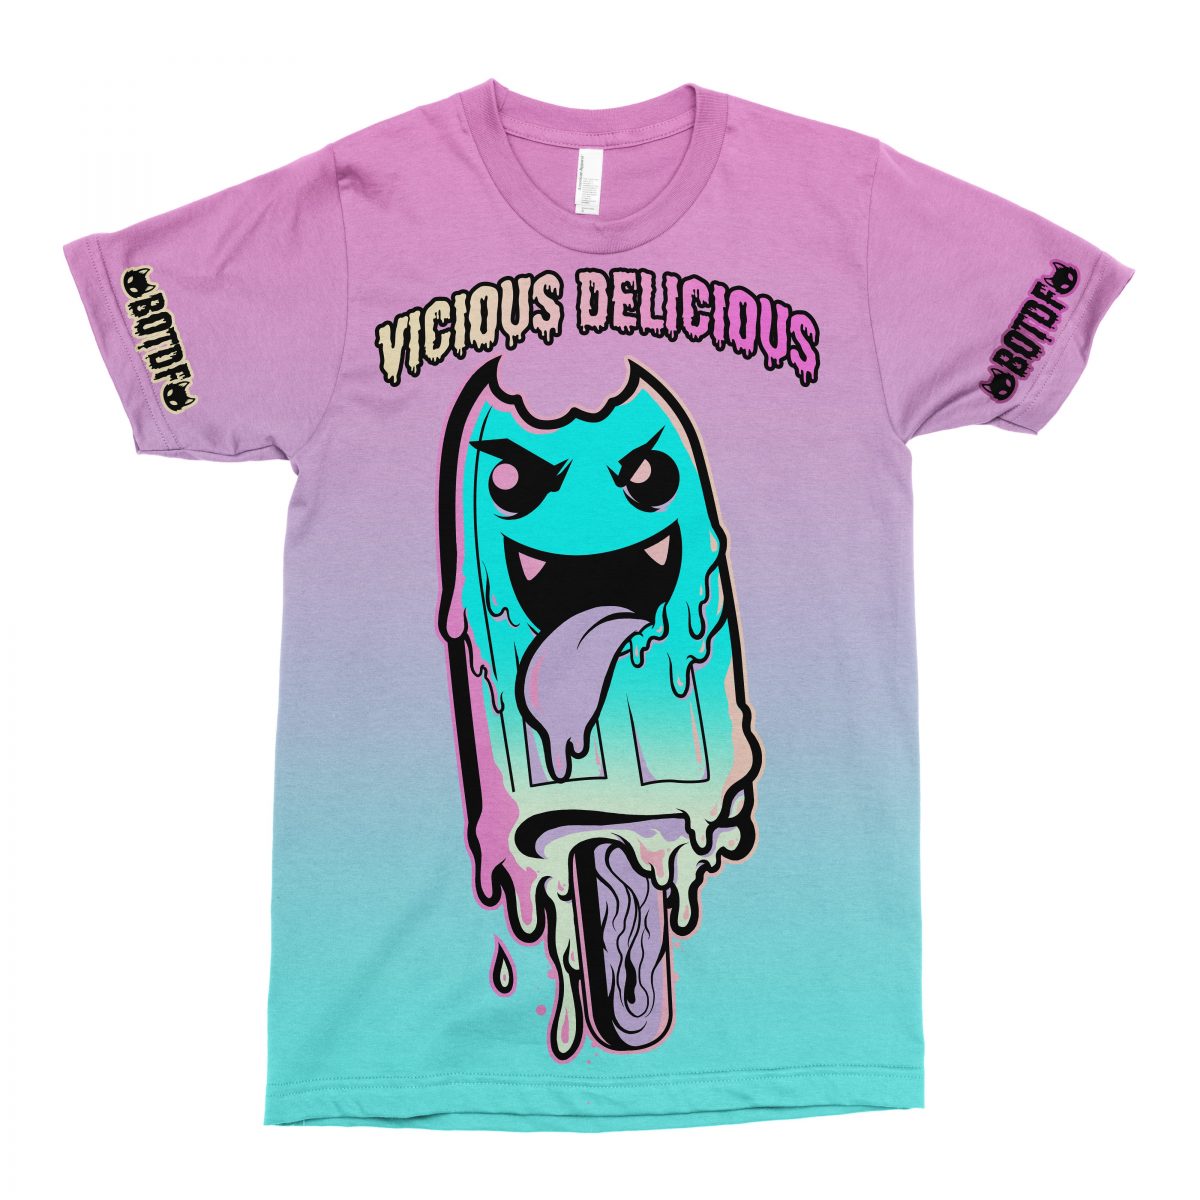 NEW! Pastel Vicious Delicious Shirt 2.0 (FREE GIFT INCLUDED) - thedarkarts